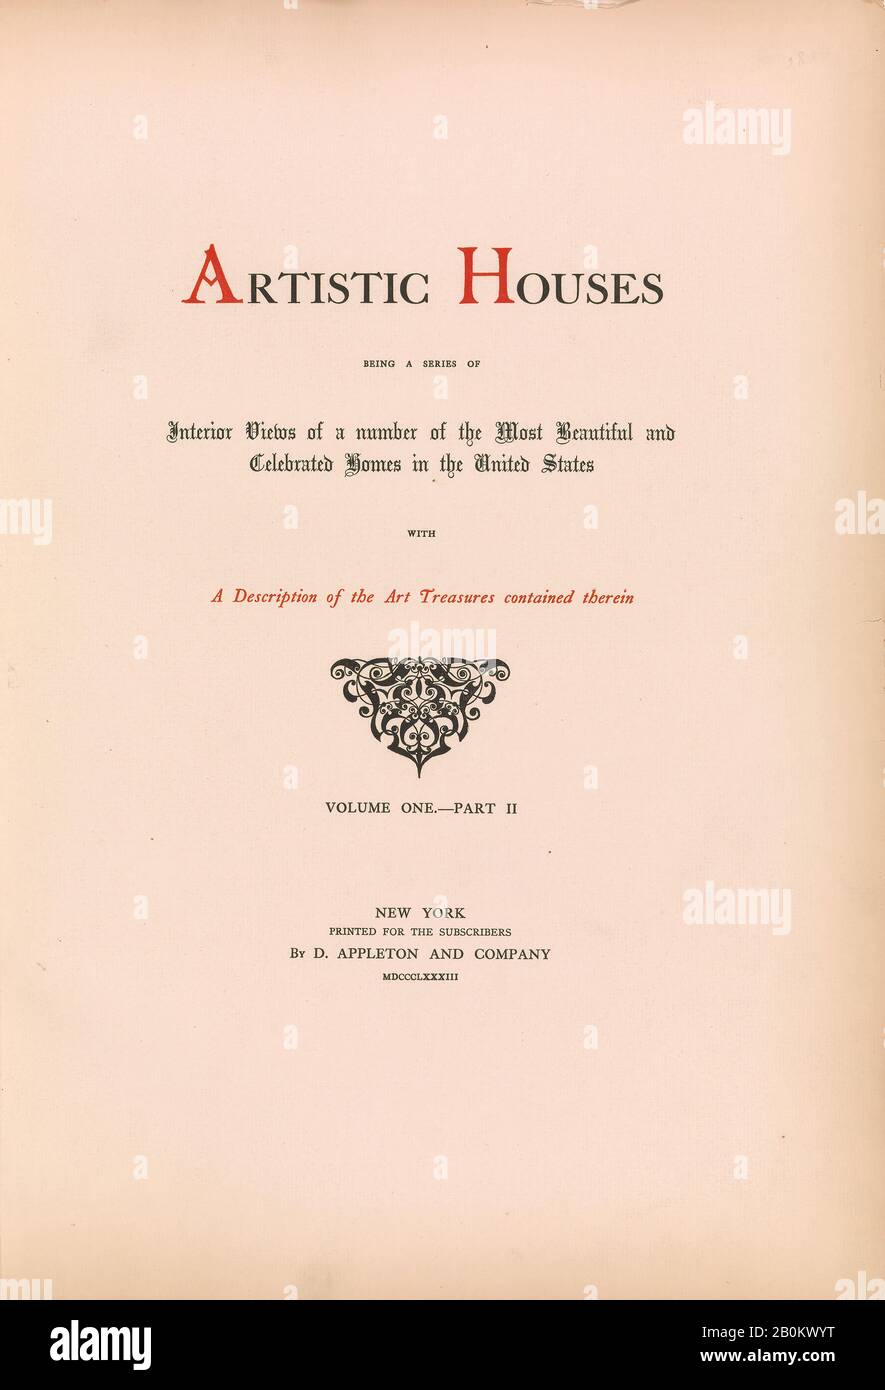 D. Appleton & Co., Artistic houses: being a series of interior views of a number of the most beautiful and celebrated homes in the United States: with a description of the art treasures contained therein, 1883–84, New York, New York, 2 volumes in 4, [193] leaves of plates ; Height: 20 1/2 in. (52 cm Stock Photo